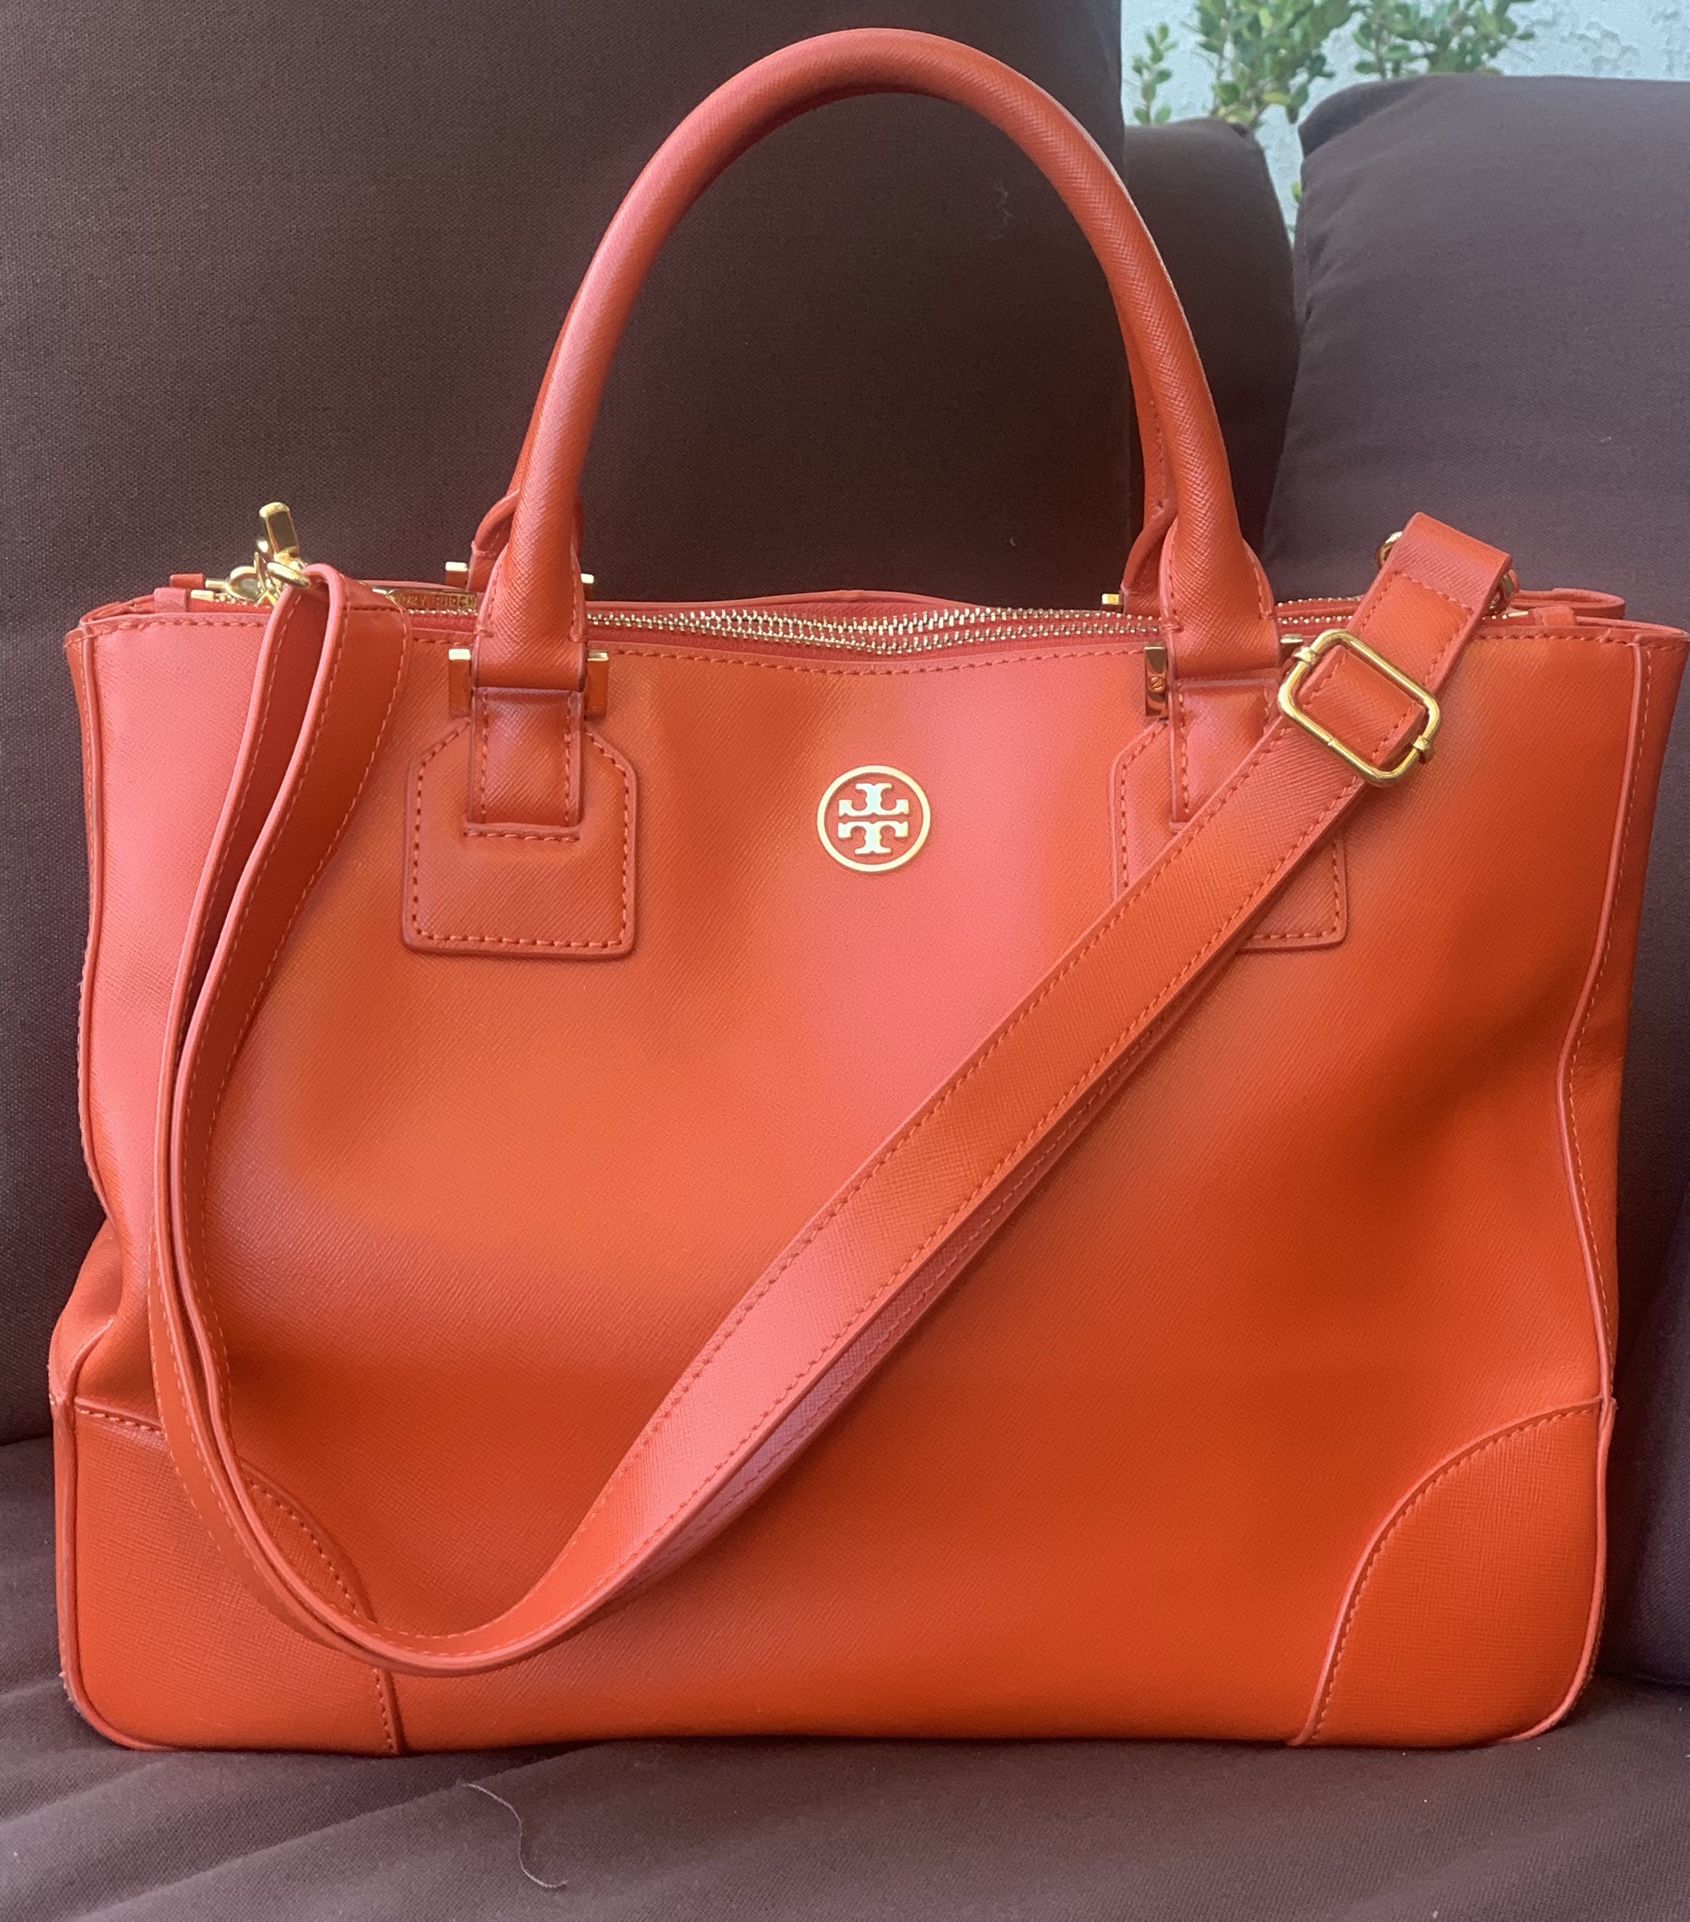 TORY BURCH Robinson Double Zip Tote Shoulder Hand Bag, Poppy Red Orange